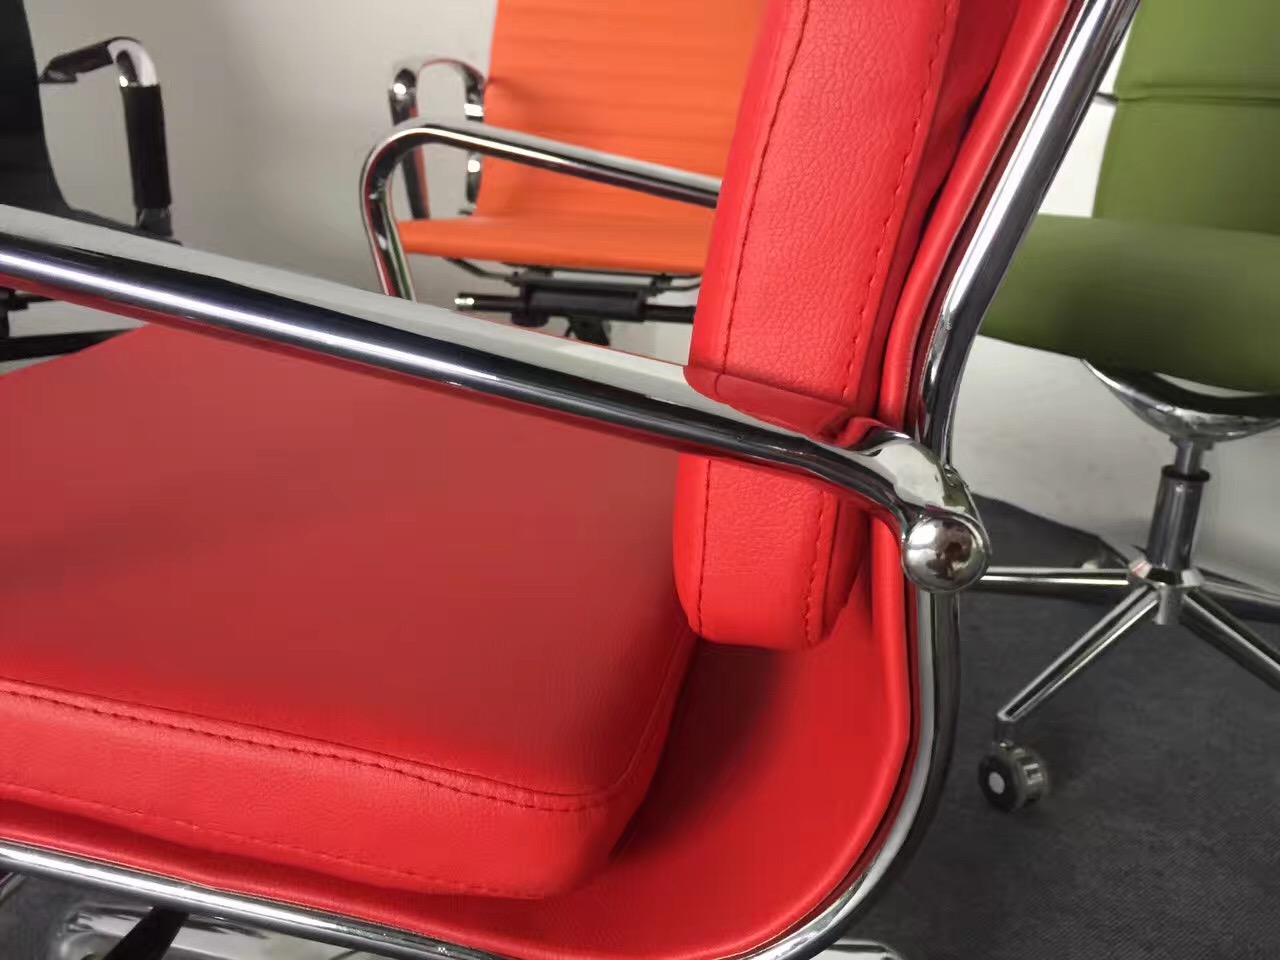 Modern red eames office chair/reclining red office chair/ergonomic red eames mesh chair